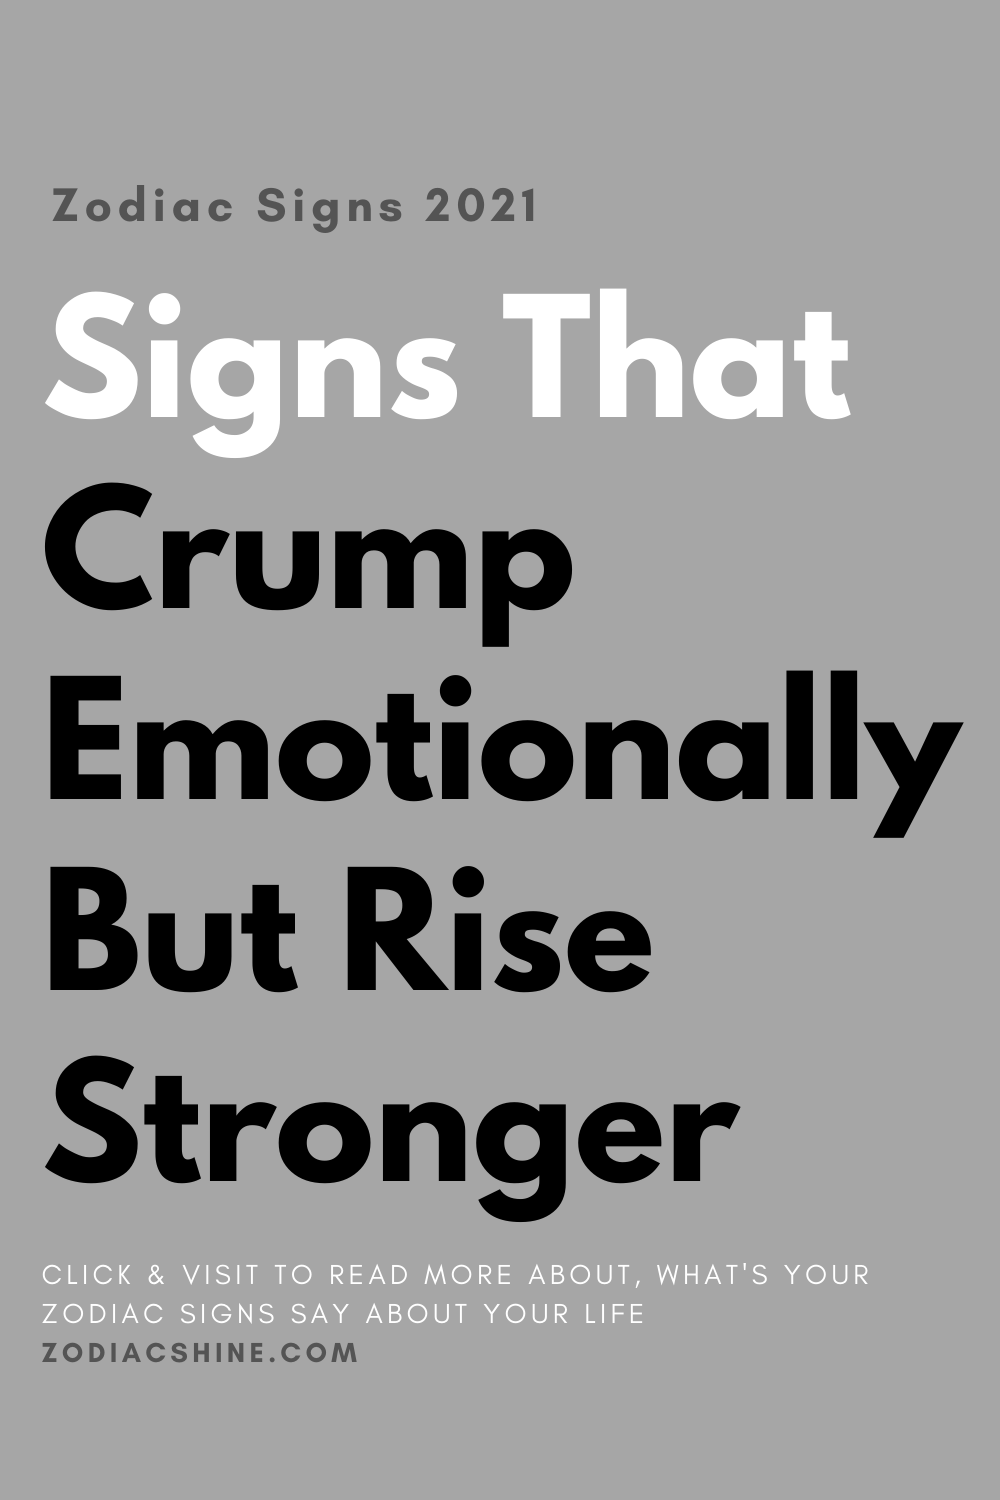 Signs That Crump Emotionally But Rise Stronger